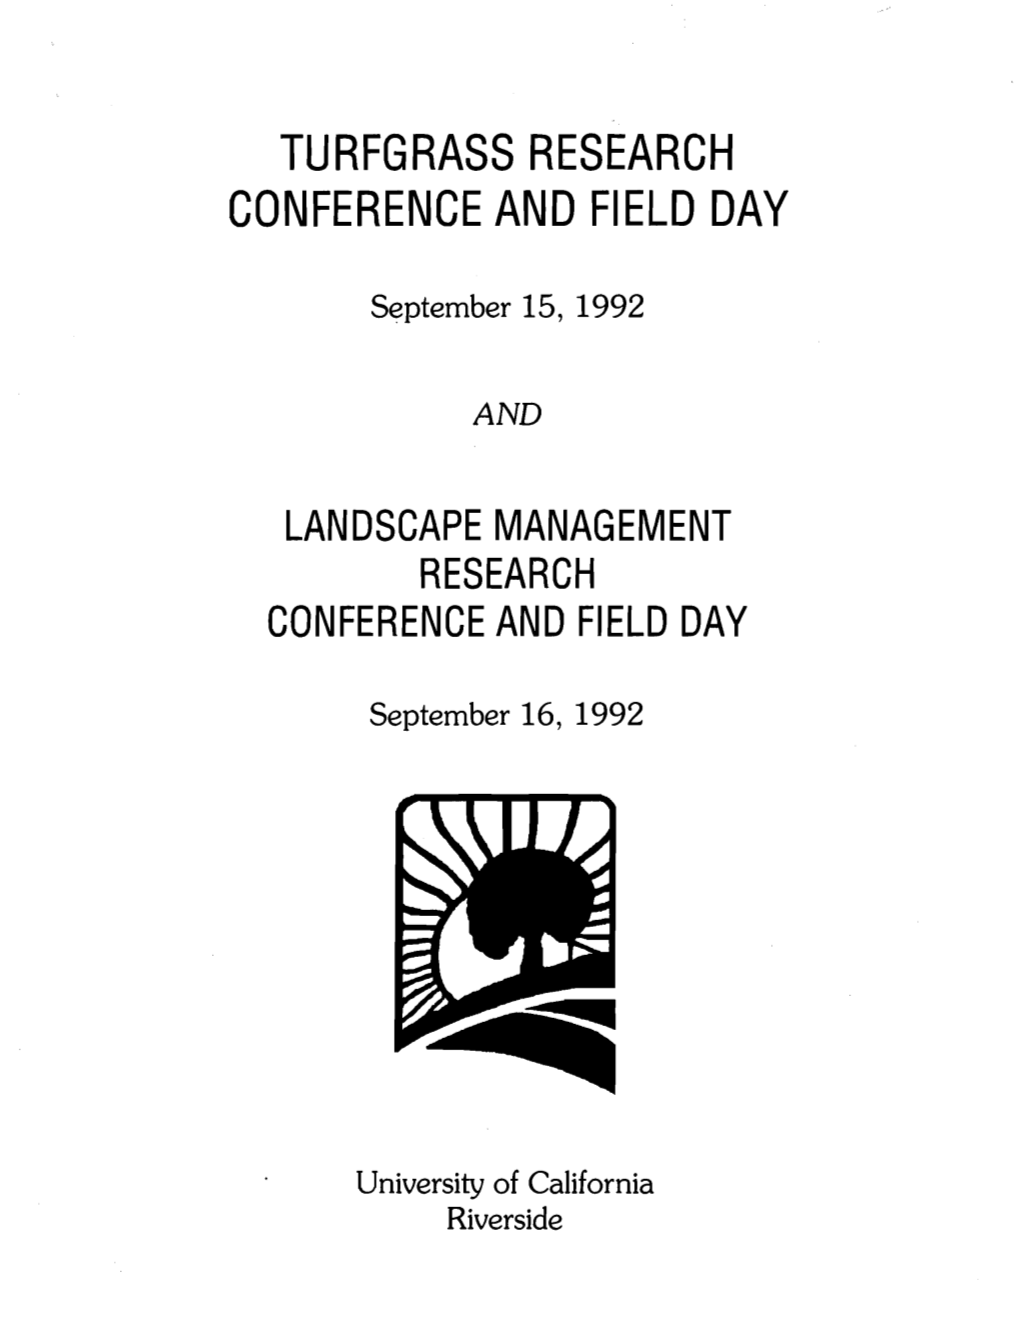 Turfgrass Research Conference and Field Day